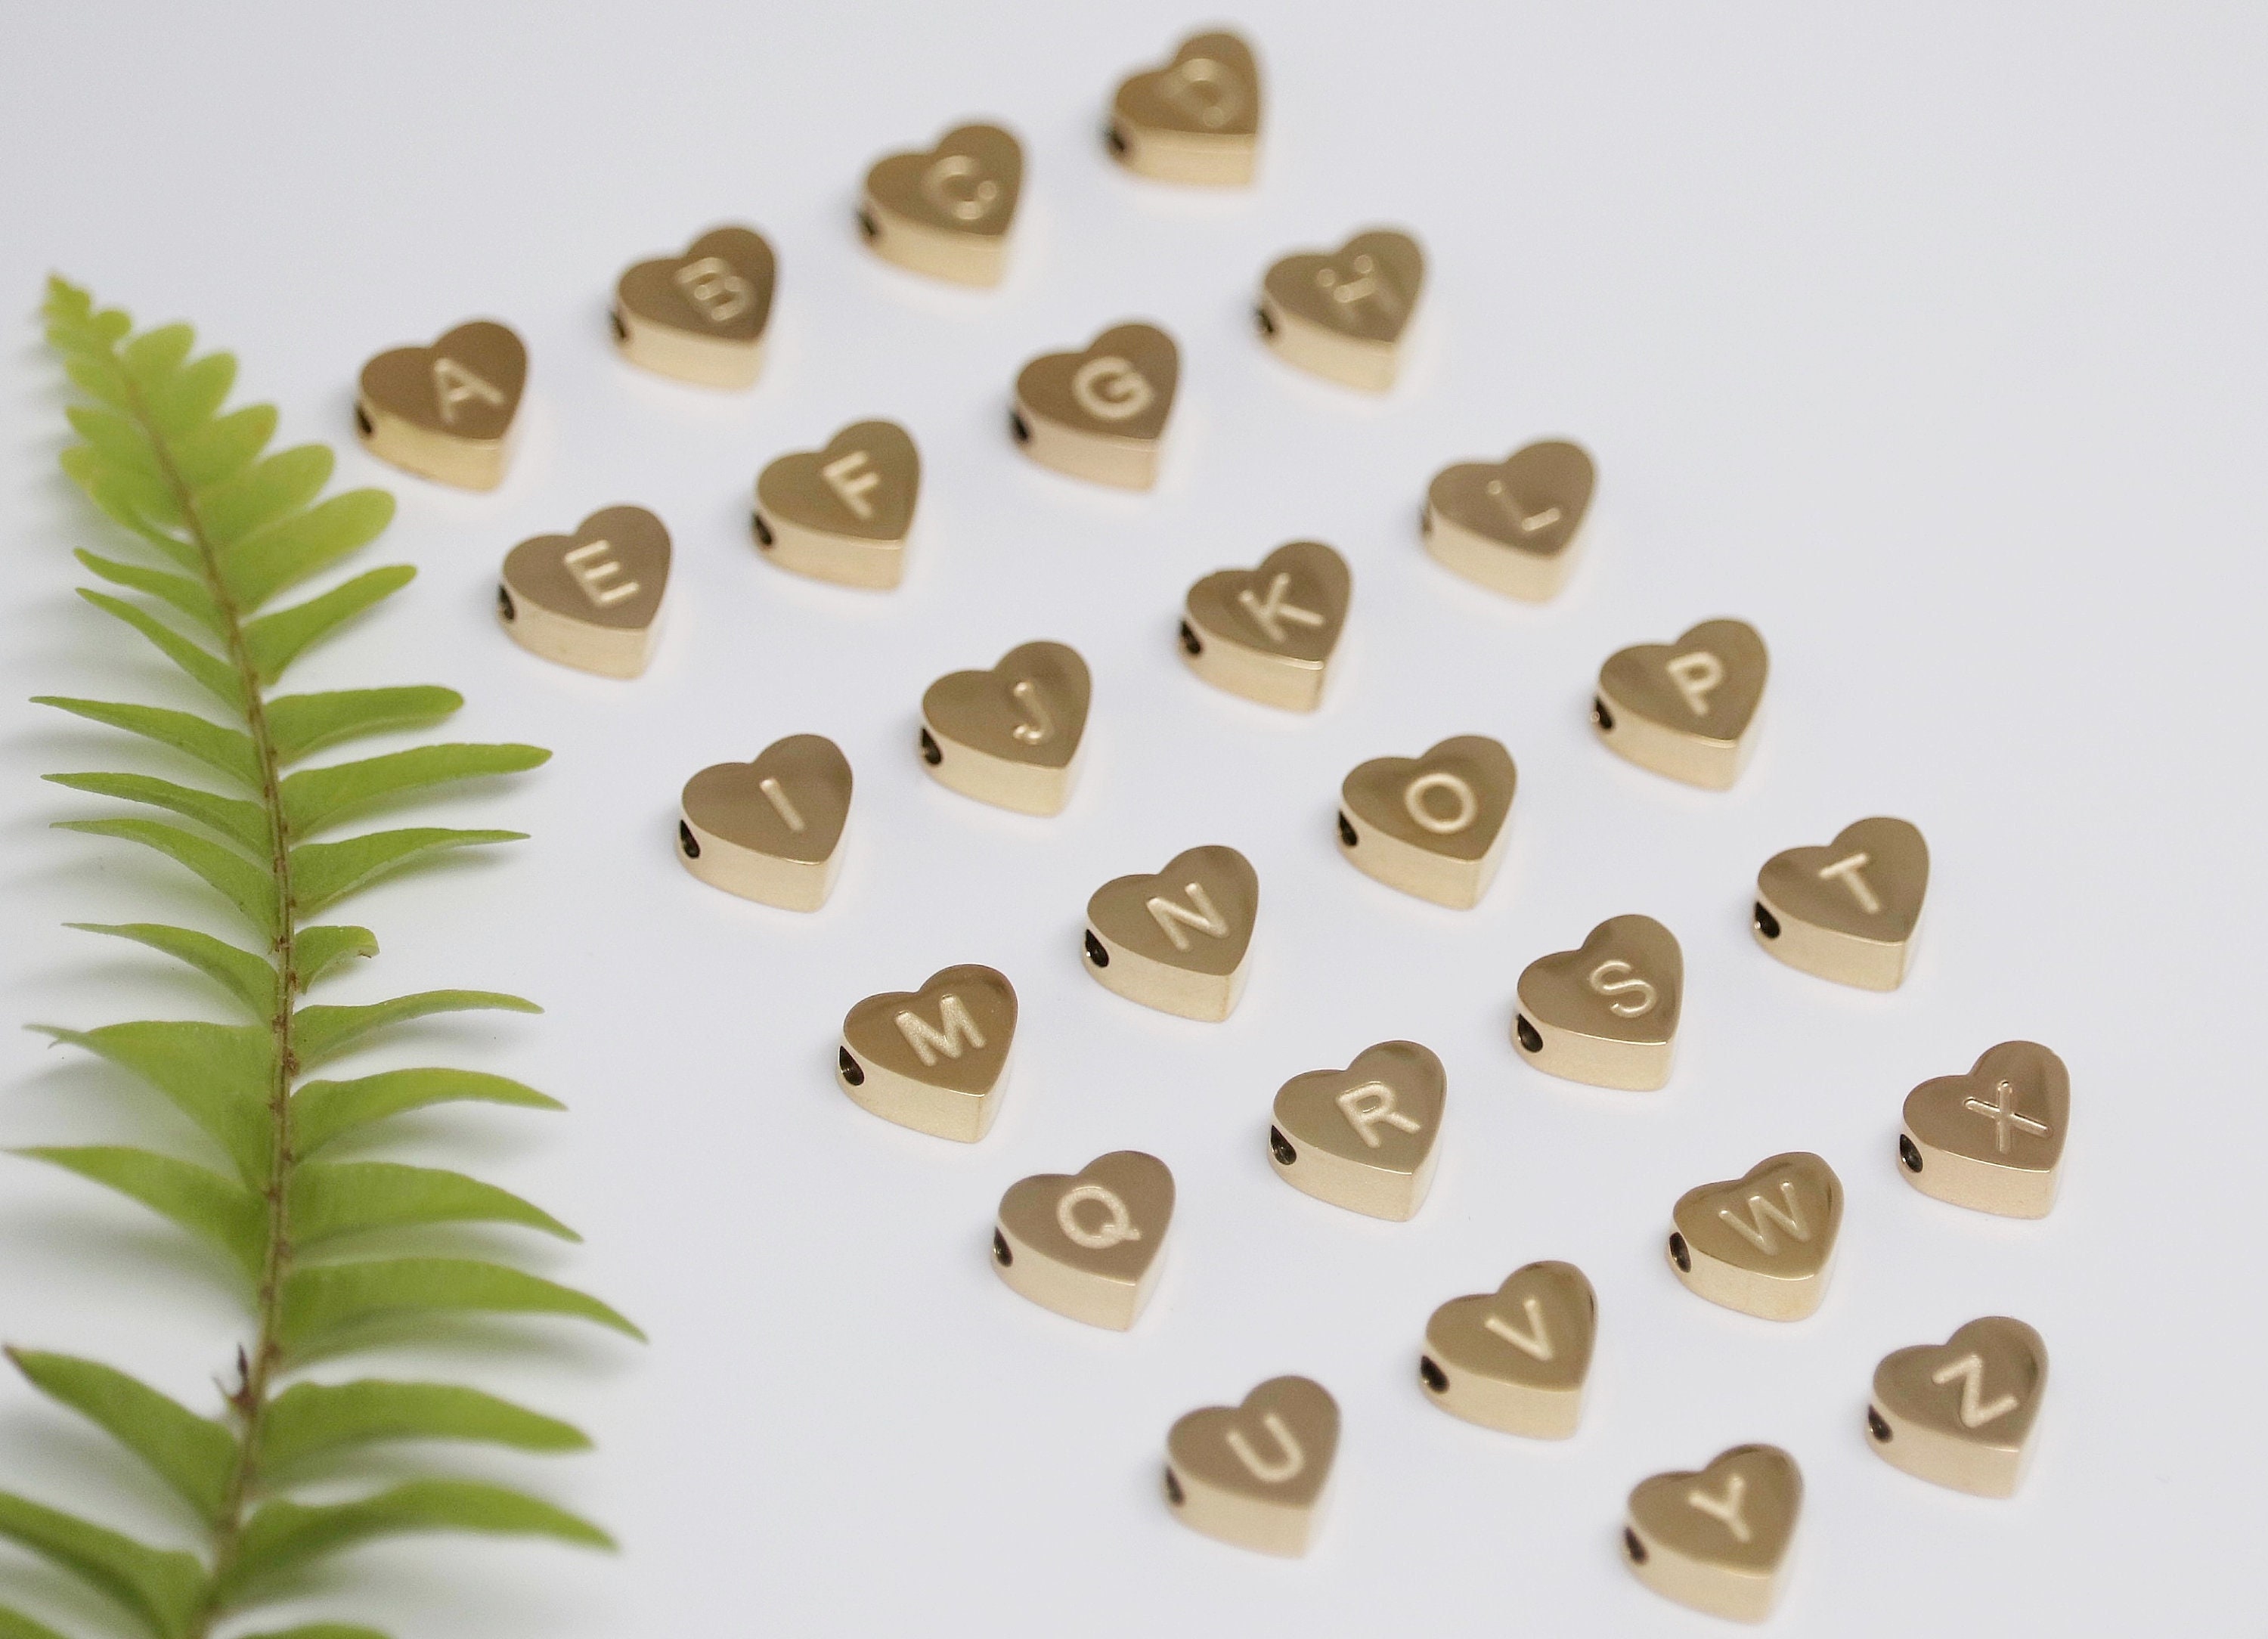 New Trendy Abalone Gold Heart Beads, A-Z 26 Initials Letter Space